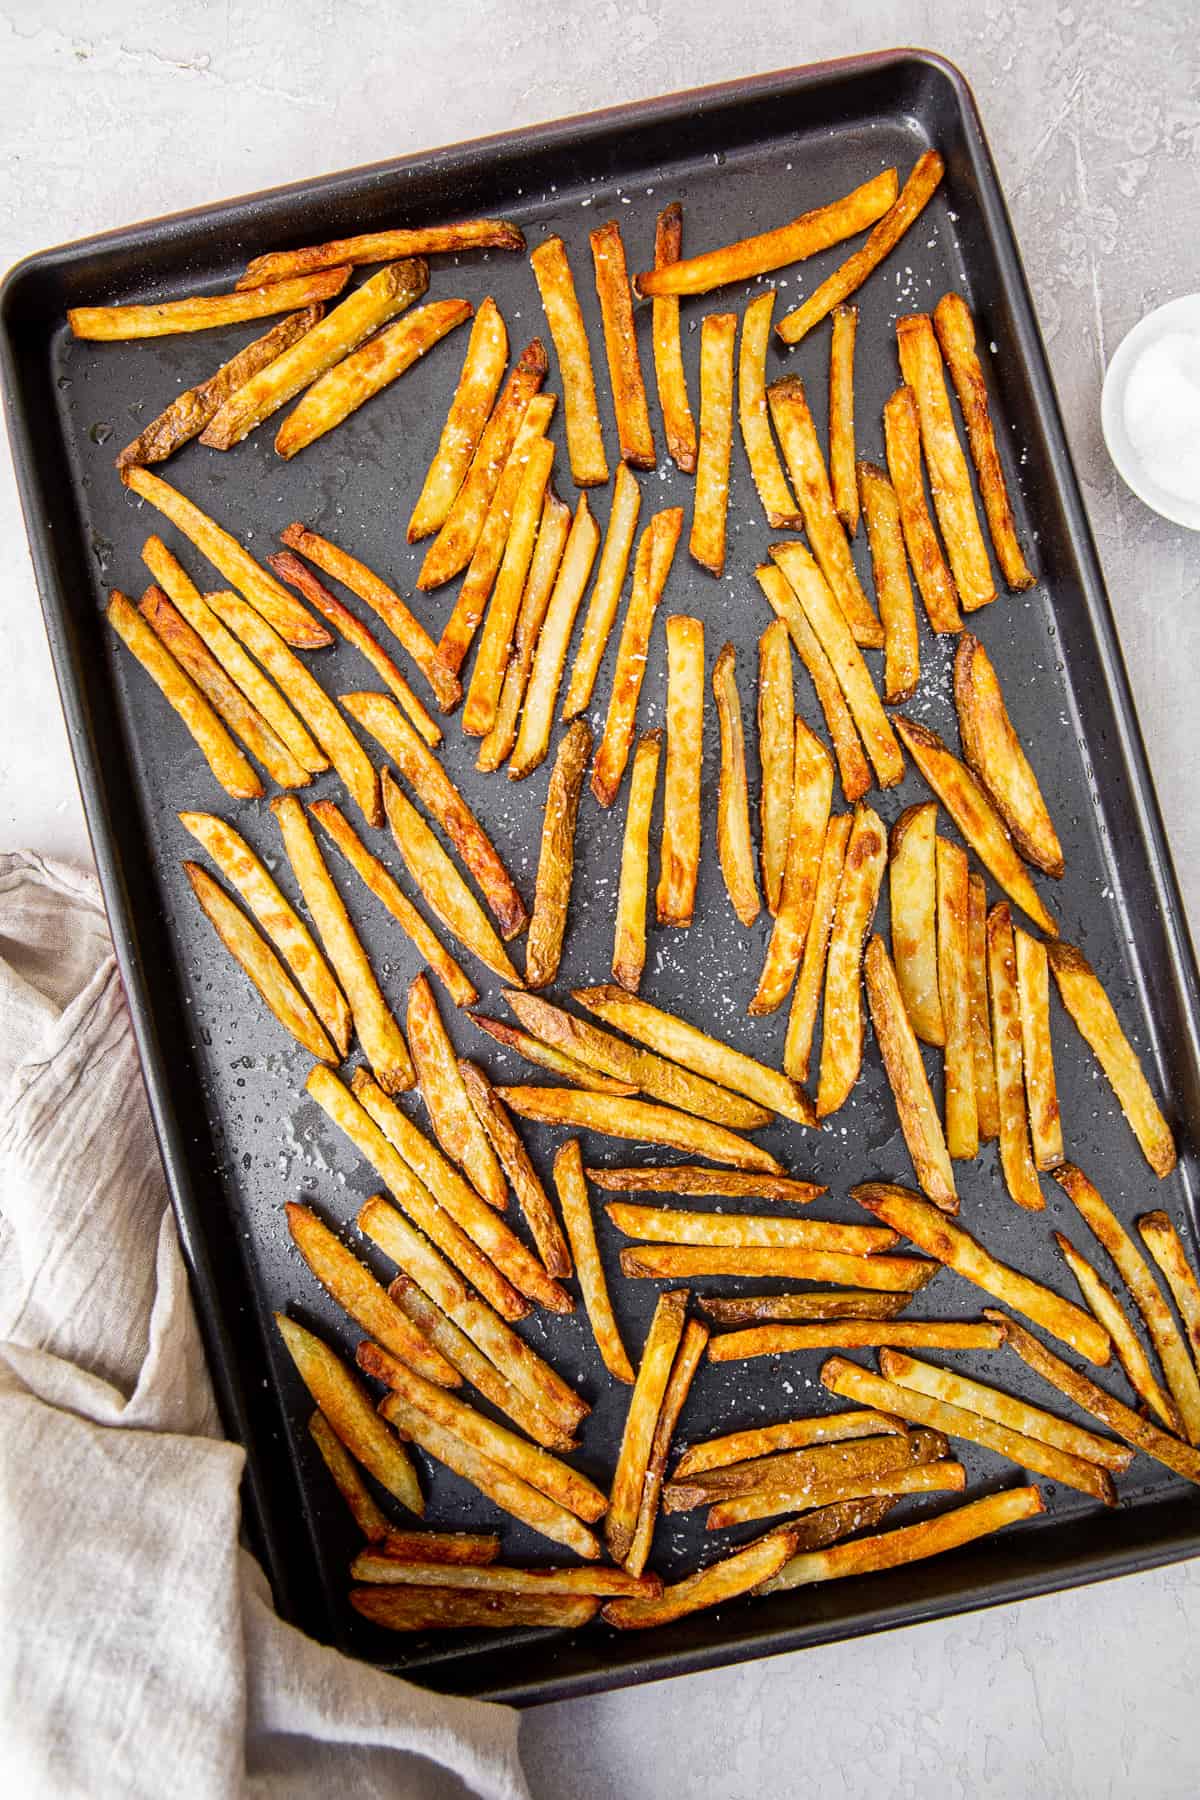 French fries on a rimmed baking sheet after baking in the oven.